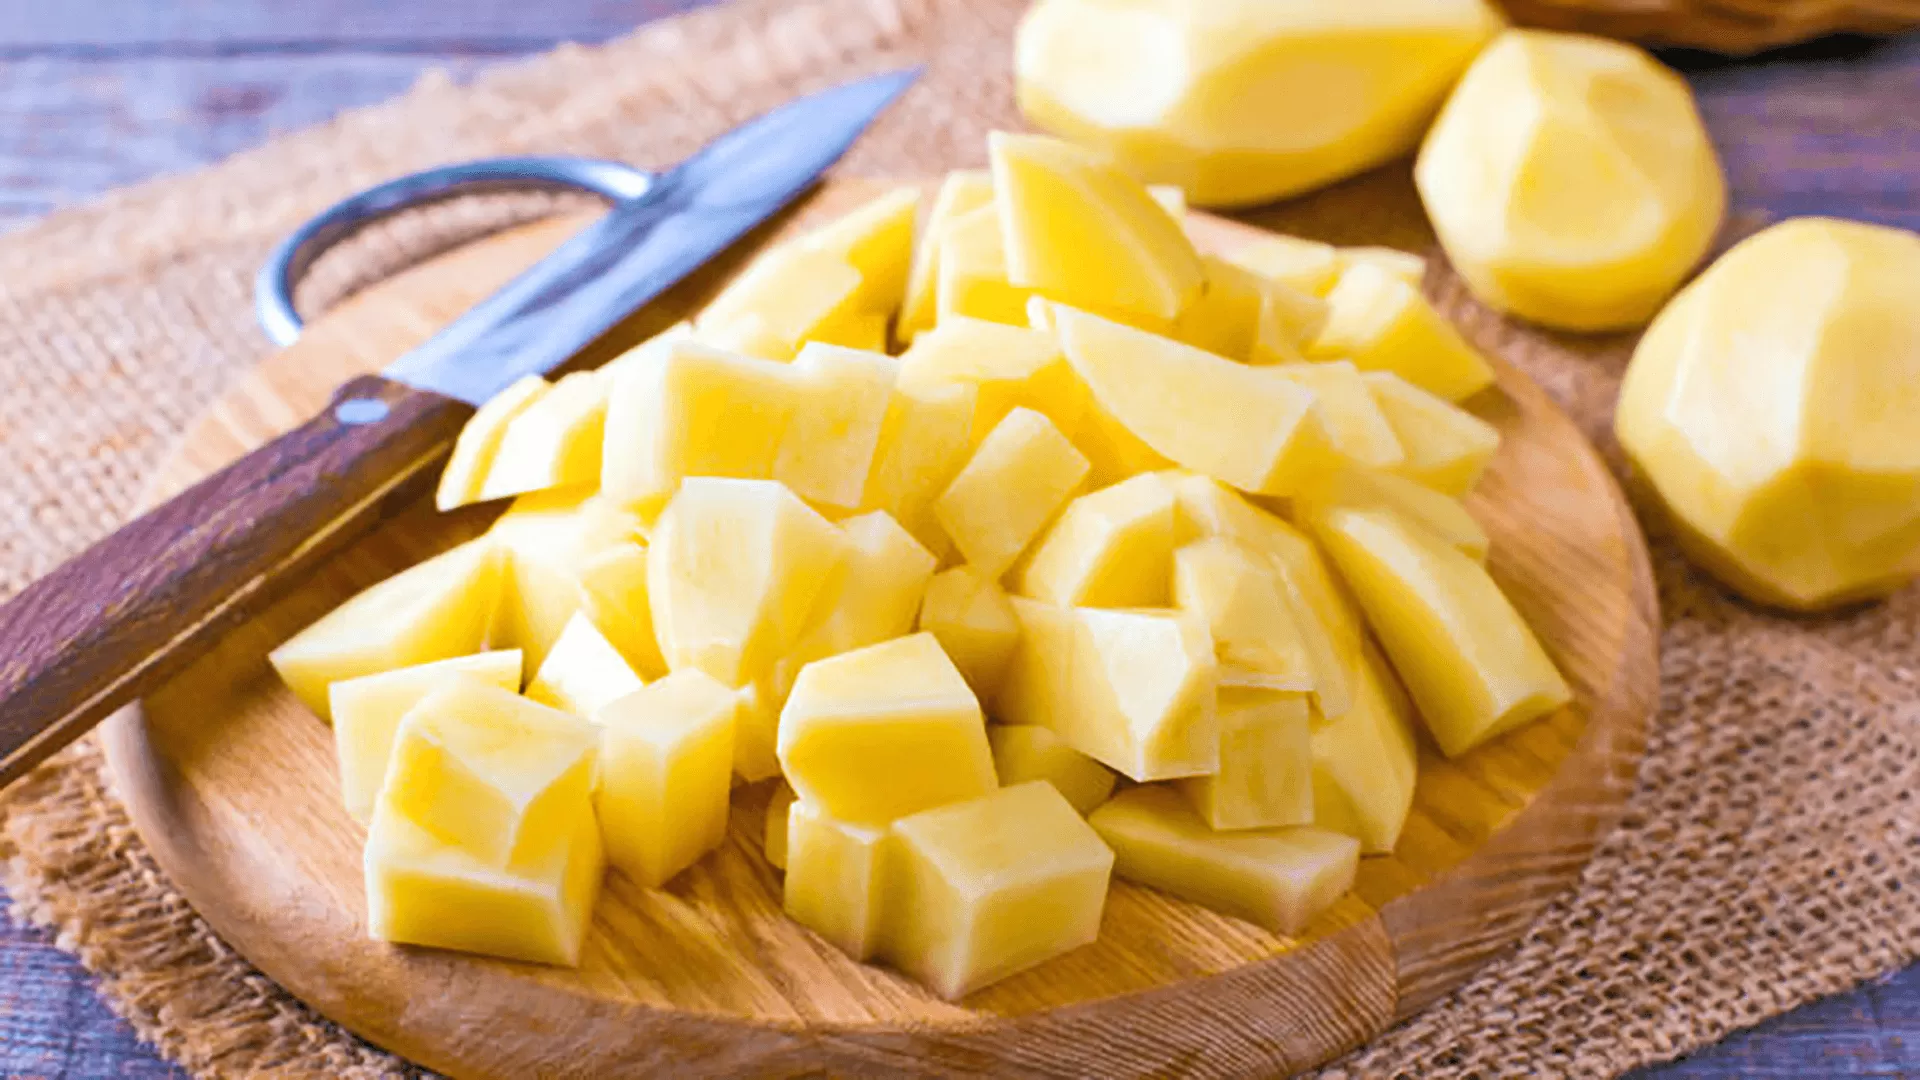 Peeled Whole and Cubed Potatoes